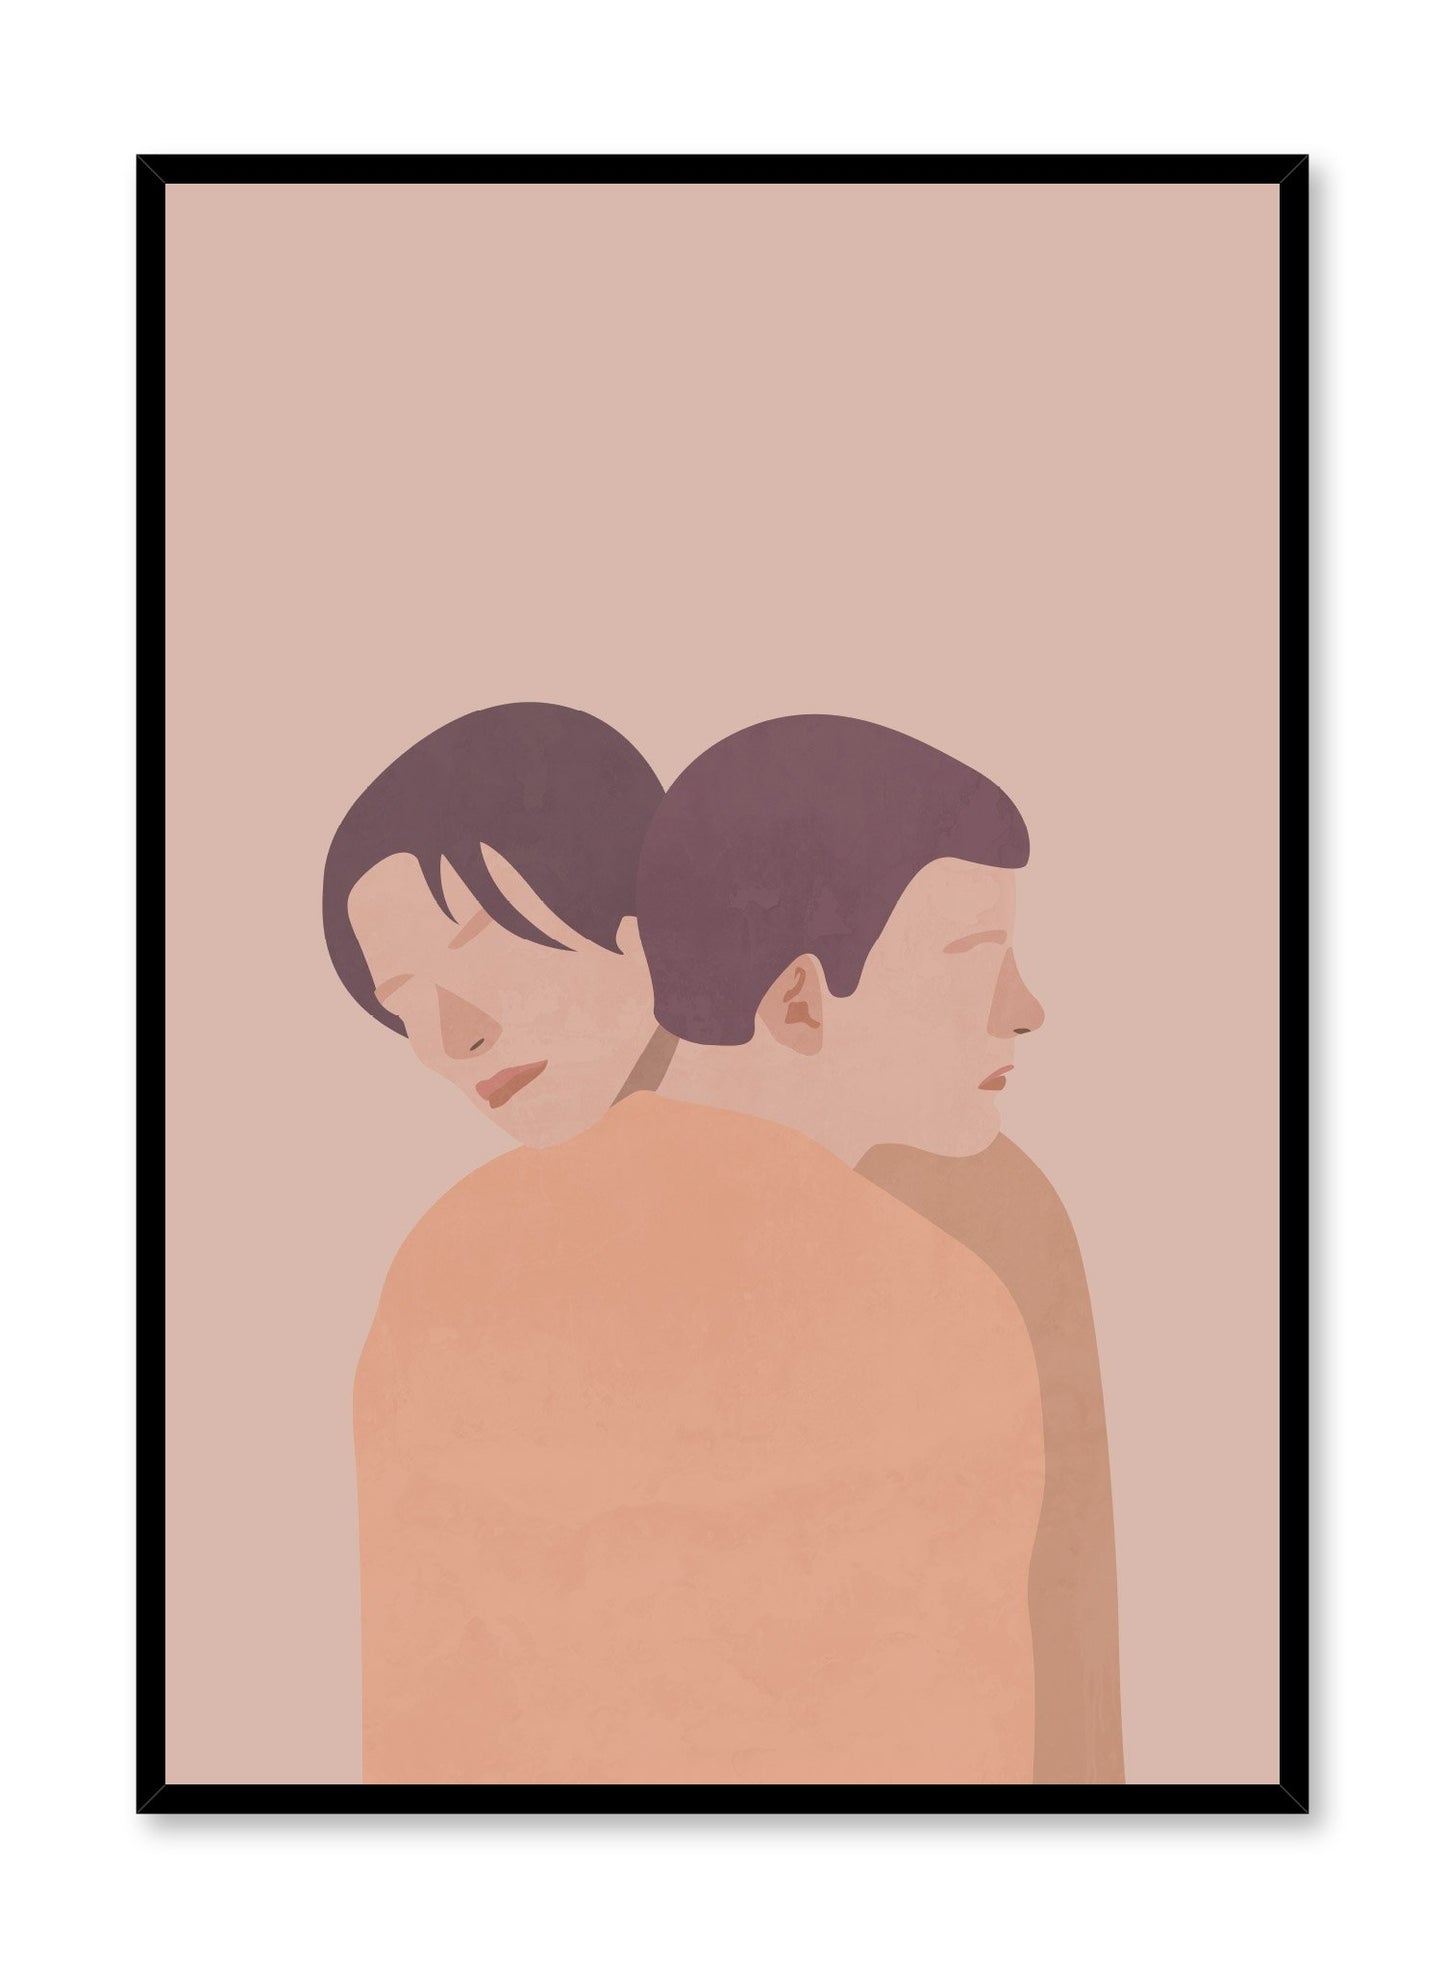 "Proximity in Beige" is a minimalist and romantic illustration poster by Opposite Wall of couple hugging lovingly in shades of beige, brown and orange.